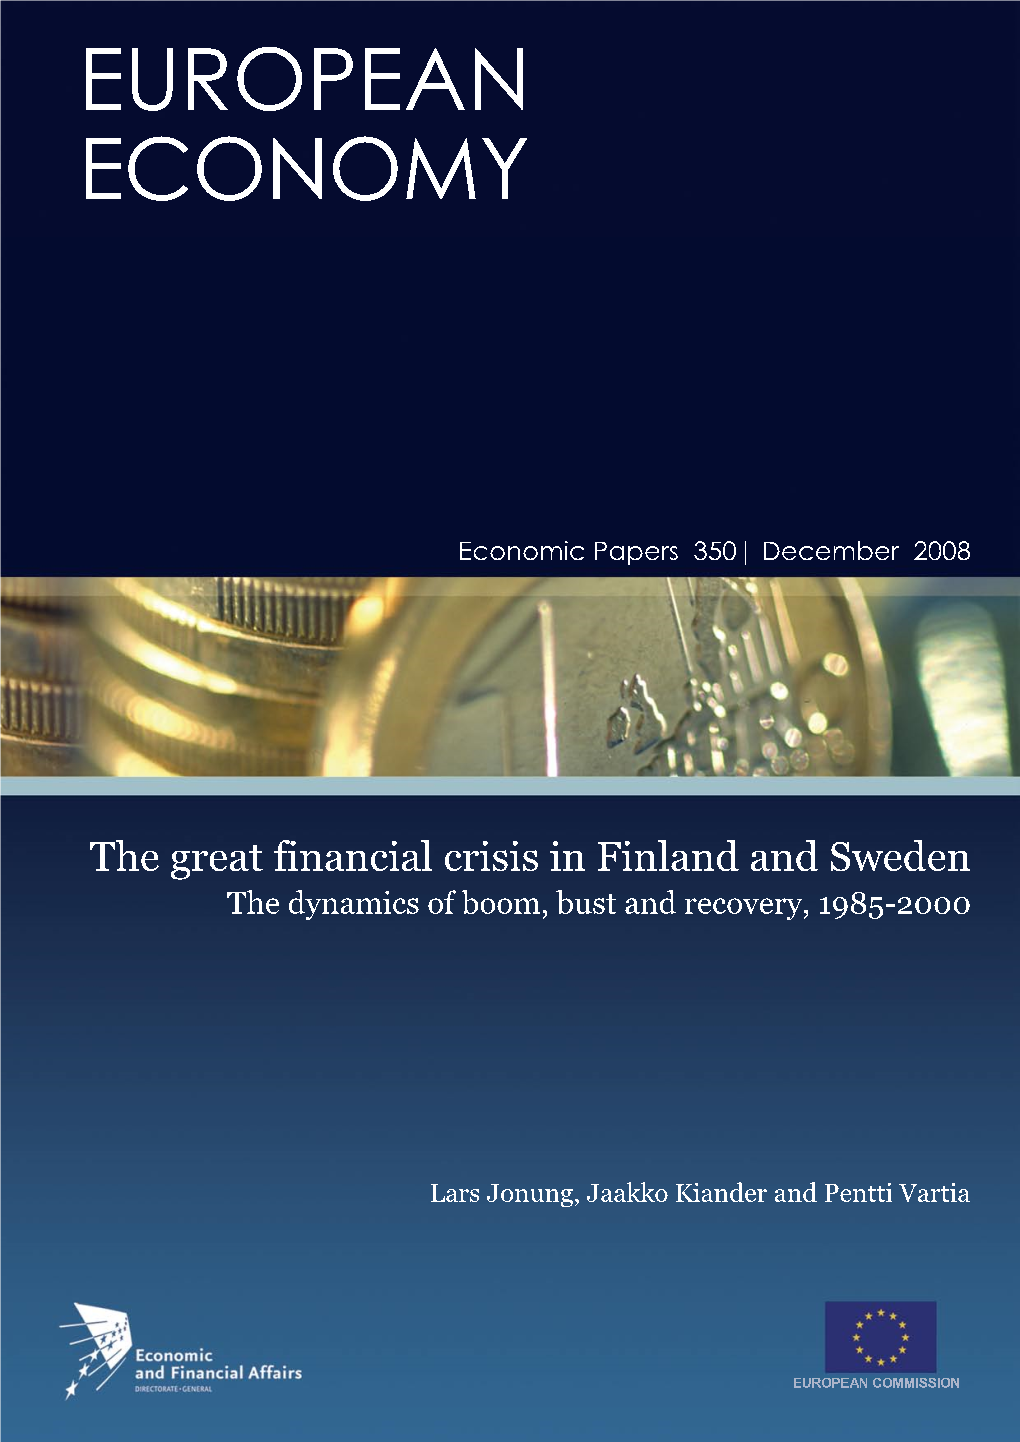 The Great Financial Crisis in Finland and Sweden the Dynamics of Boom, Bust and Recovery, 1985-2000